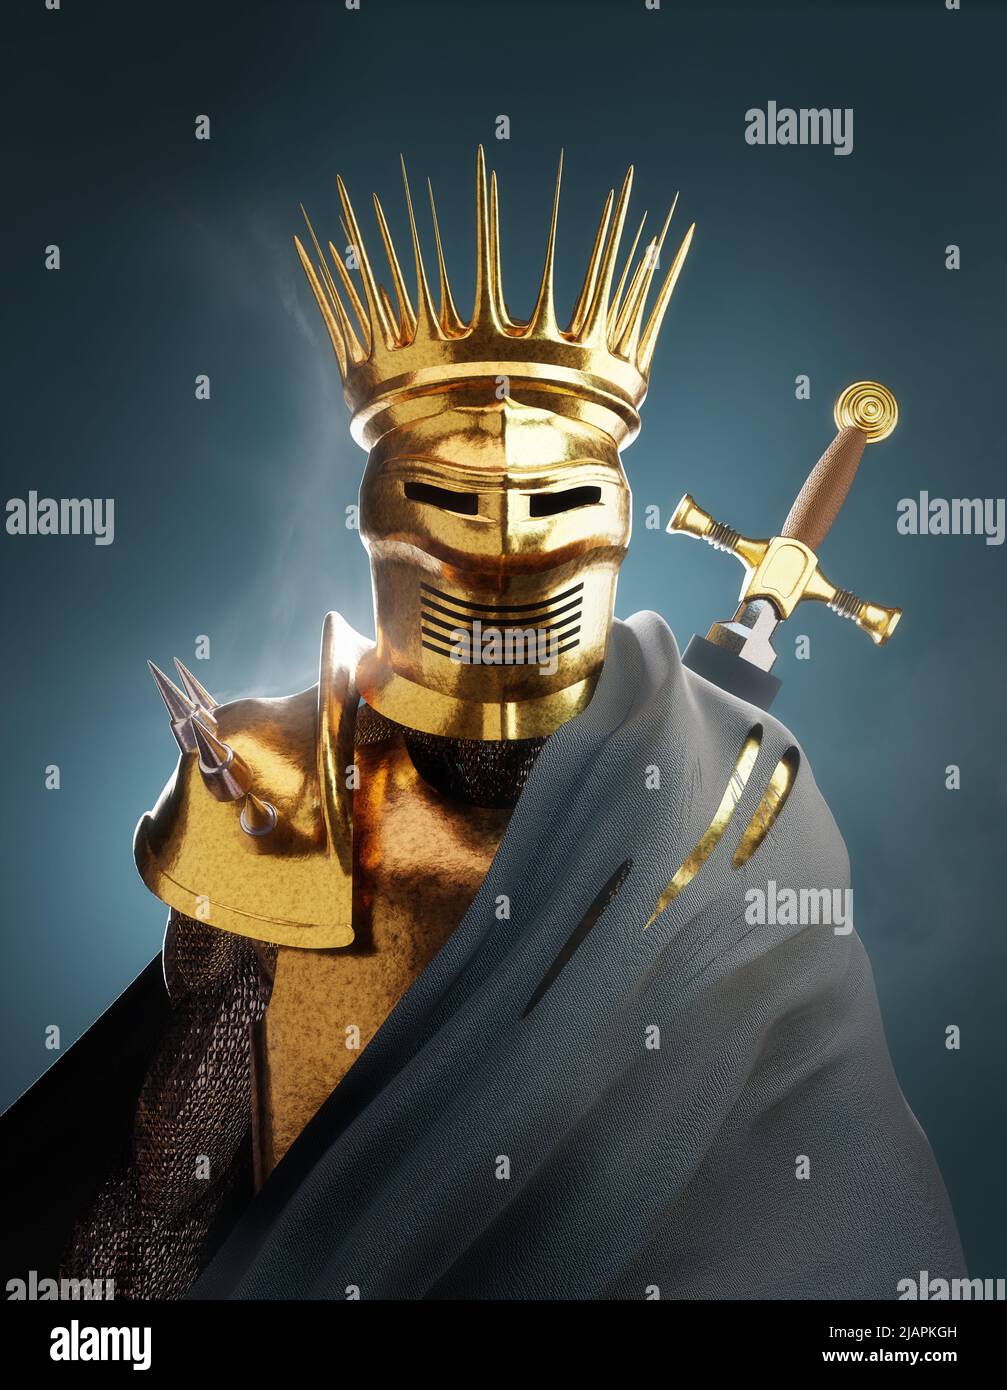 A king of knights wearing a suit of gold armour, medieval warrior 3D illustration portrait Stock Photo